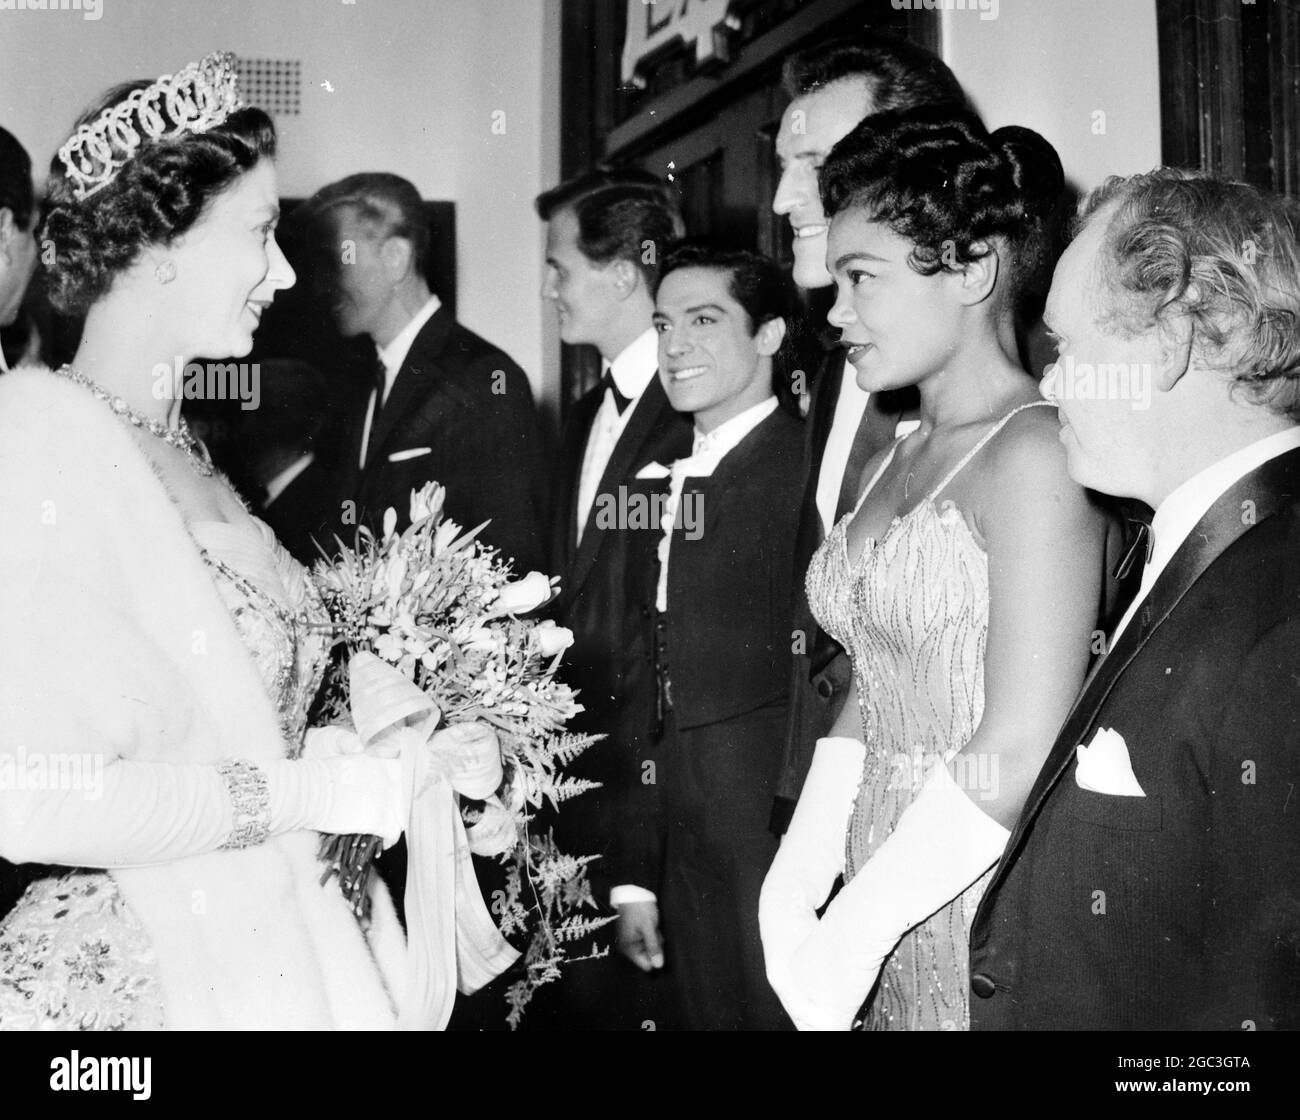 Queen Elizabeth II chatting to American singer Eartha Kitt who is lined up with other stars to be presented to Her Majesty, etc. at the Royal Variety Performance at the London Coliseum. (r-l) Charlie Drake, Eartha Kitt, Bruce Forsyth, Antonio and Pat Boone. ©TopFoto Stock Photo